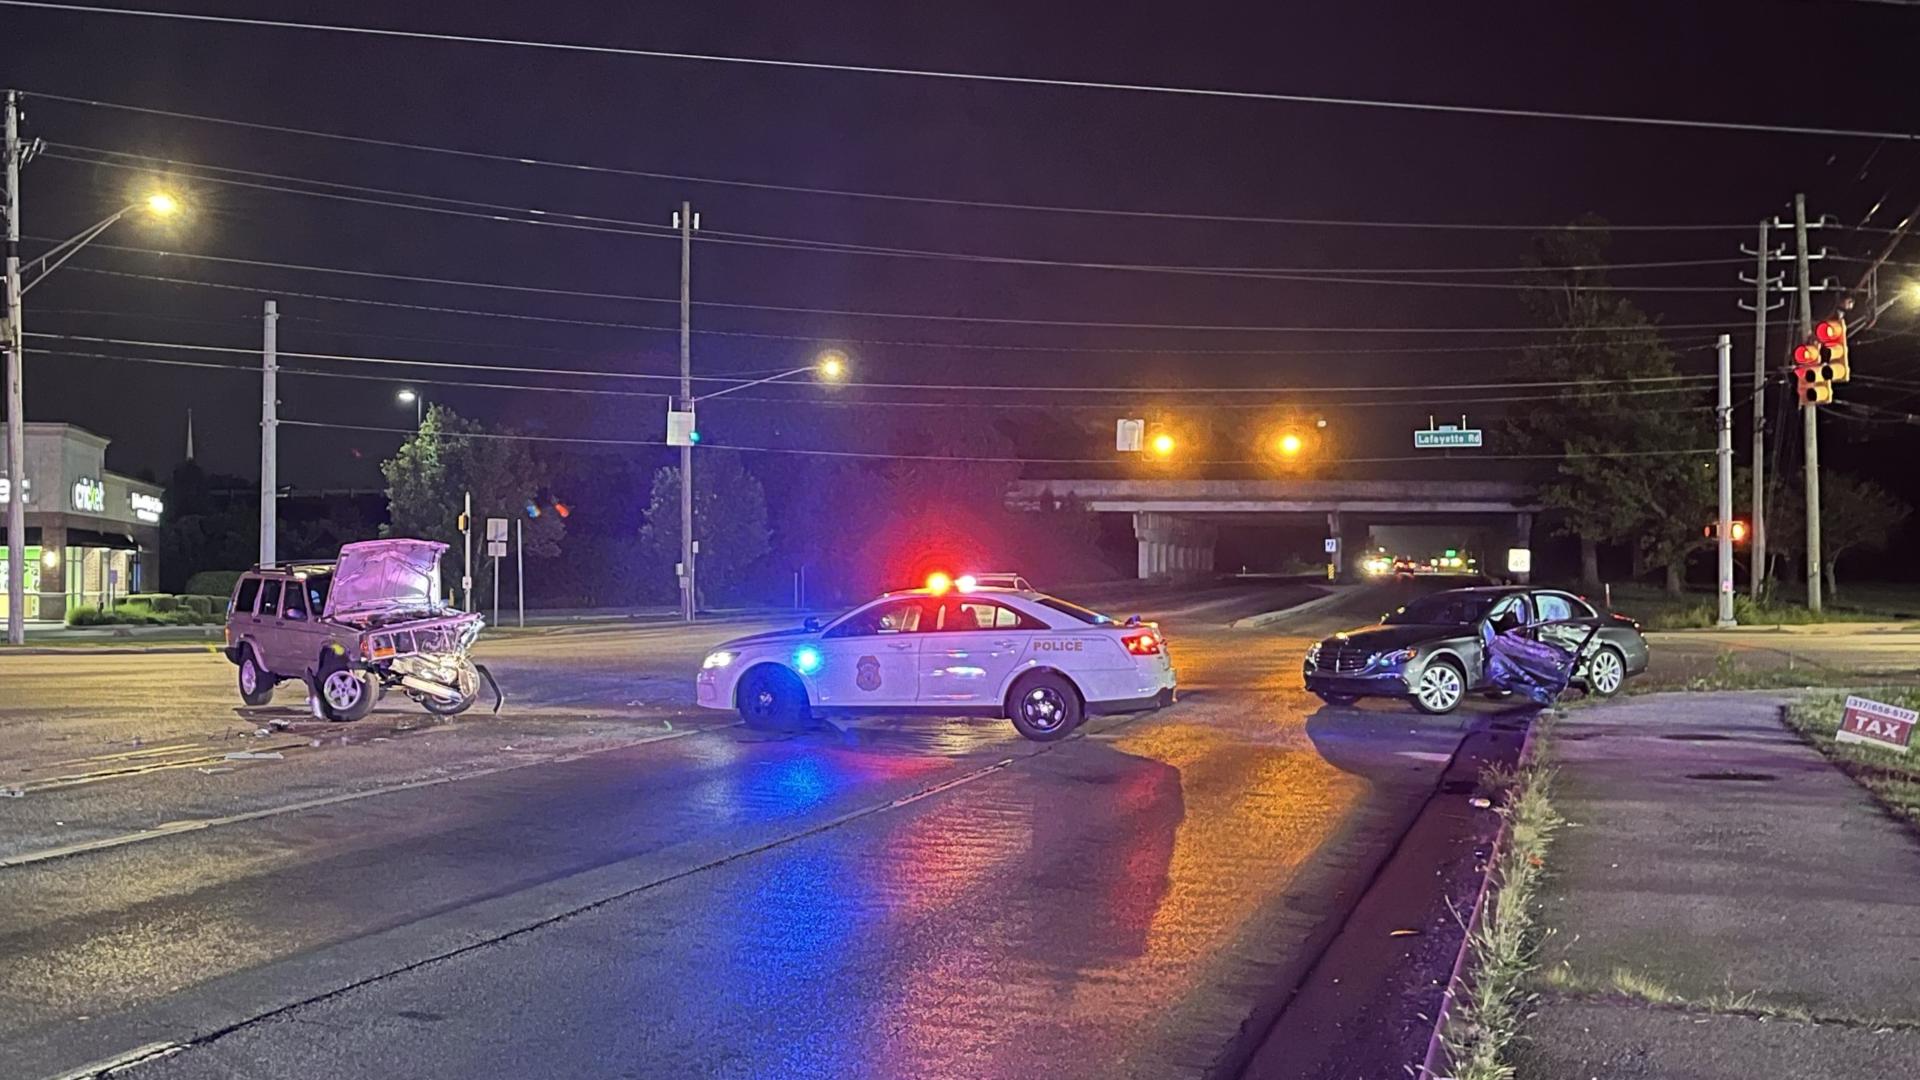 The crash was reported around 2:30 a.m. Friday near the intersection of West 56th Street and Lafayette Road.